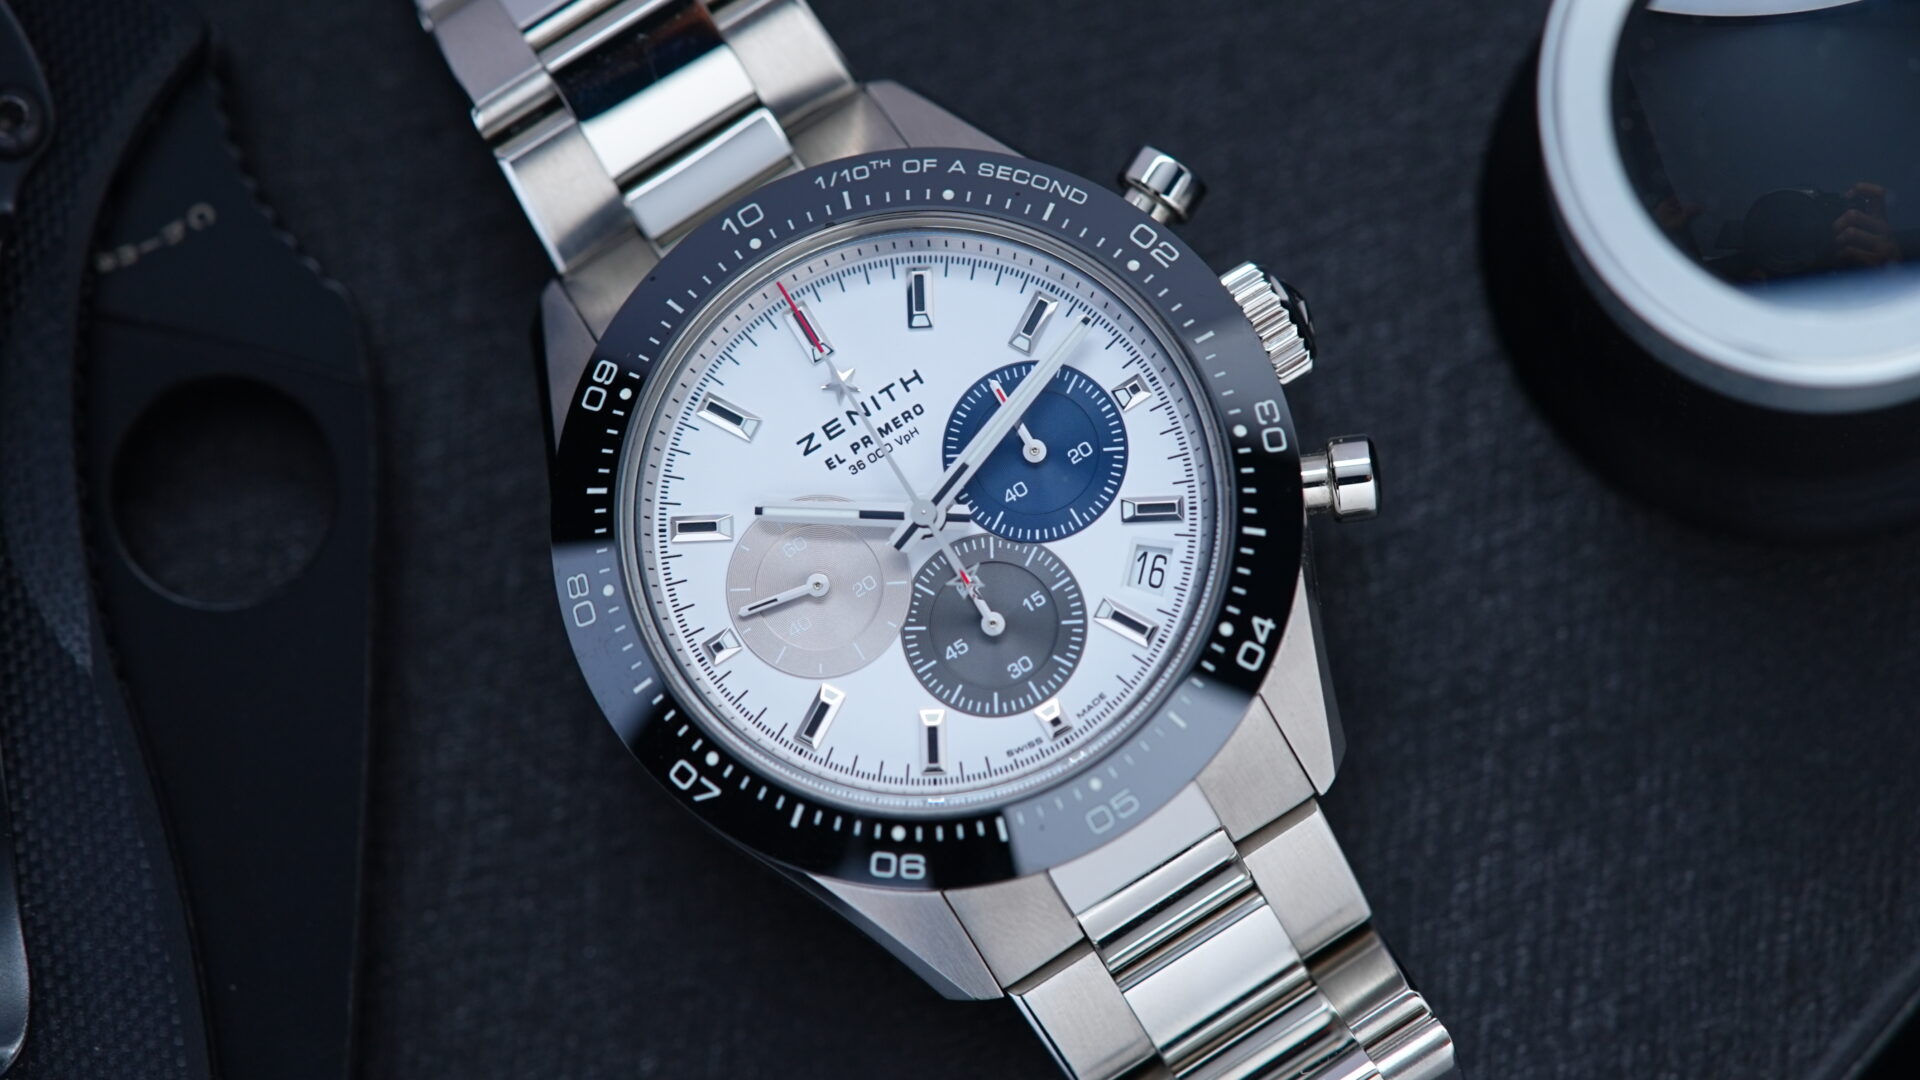 Zenith Chronomaster Sport Panda watch pictured on an angle.